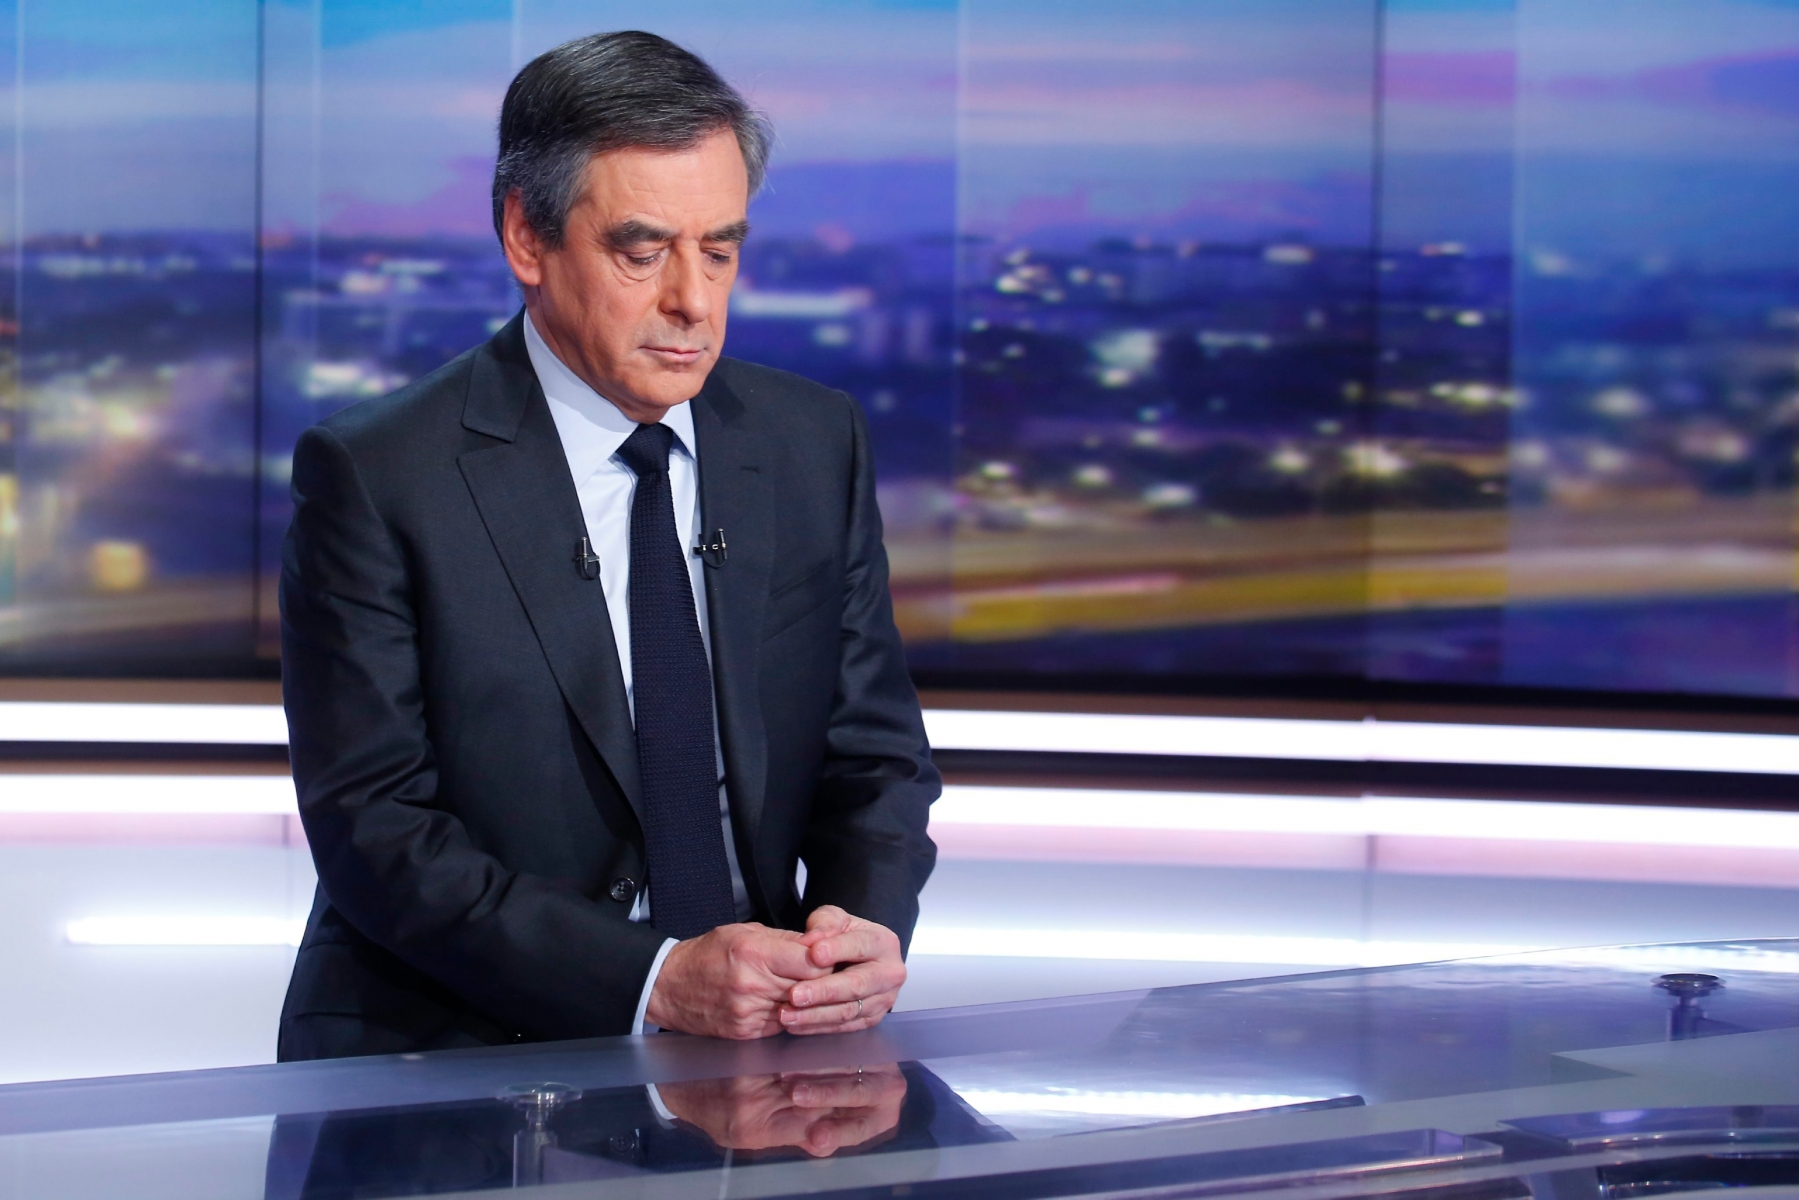 epa05752988 Former French Prime minister and right-wing candidate for the upcoming presidential election Francois Fillon poses prior to a broadcast interview on a set of French TV channel TF1, in Boulogne-Billancourt, near Paris, France, 26 January 2017. Francois Fillon has become under pressure to explain the previous employment of his wife as parliamentary aide while he was a MP and to give details of the work she did.  EPA/PIERRE CONSTANT / POOL MAXPPP OUT FRANCE ELECTIONS RIGHT WING VOTE